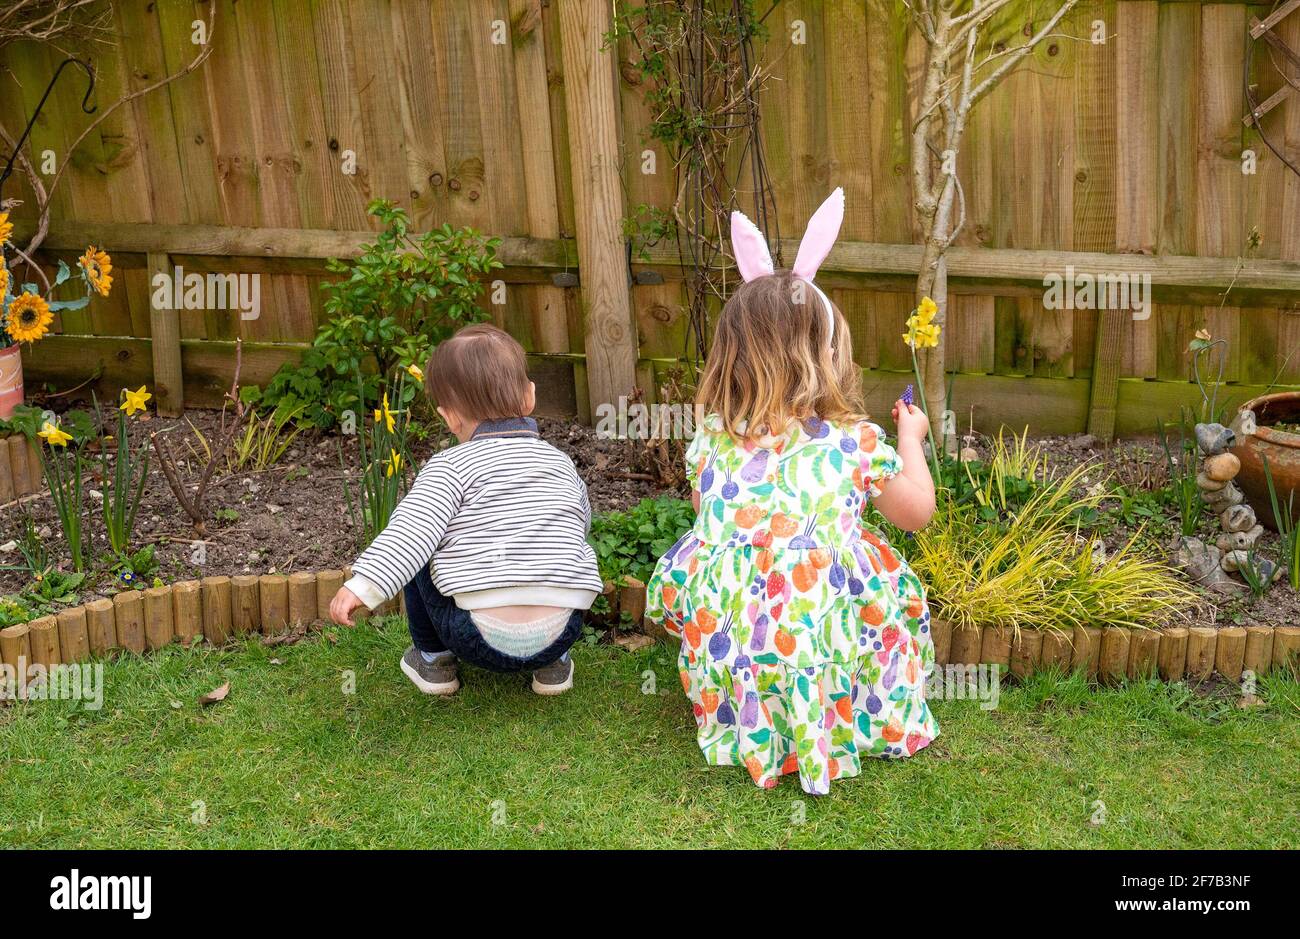 Easter 2021 with family 2 young children brother and sister playing in a garden Stock Photo